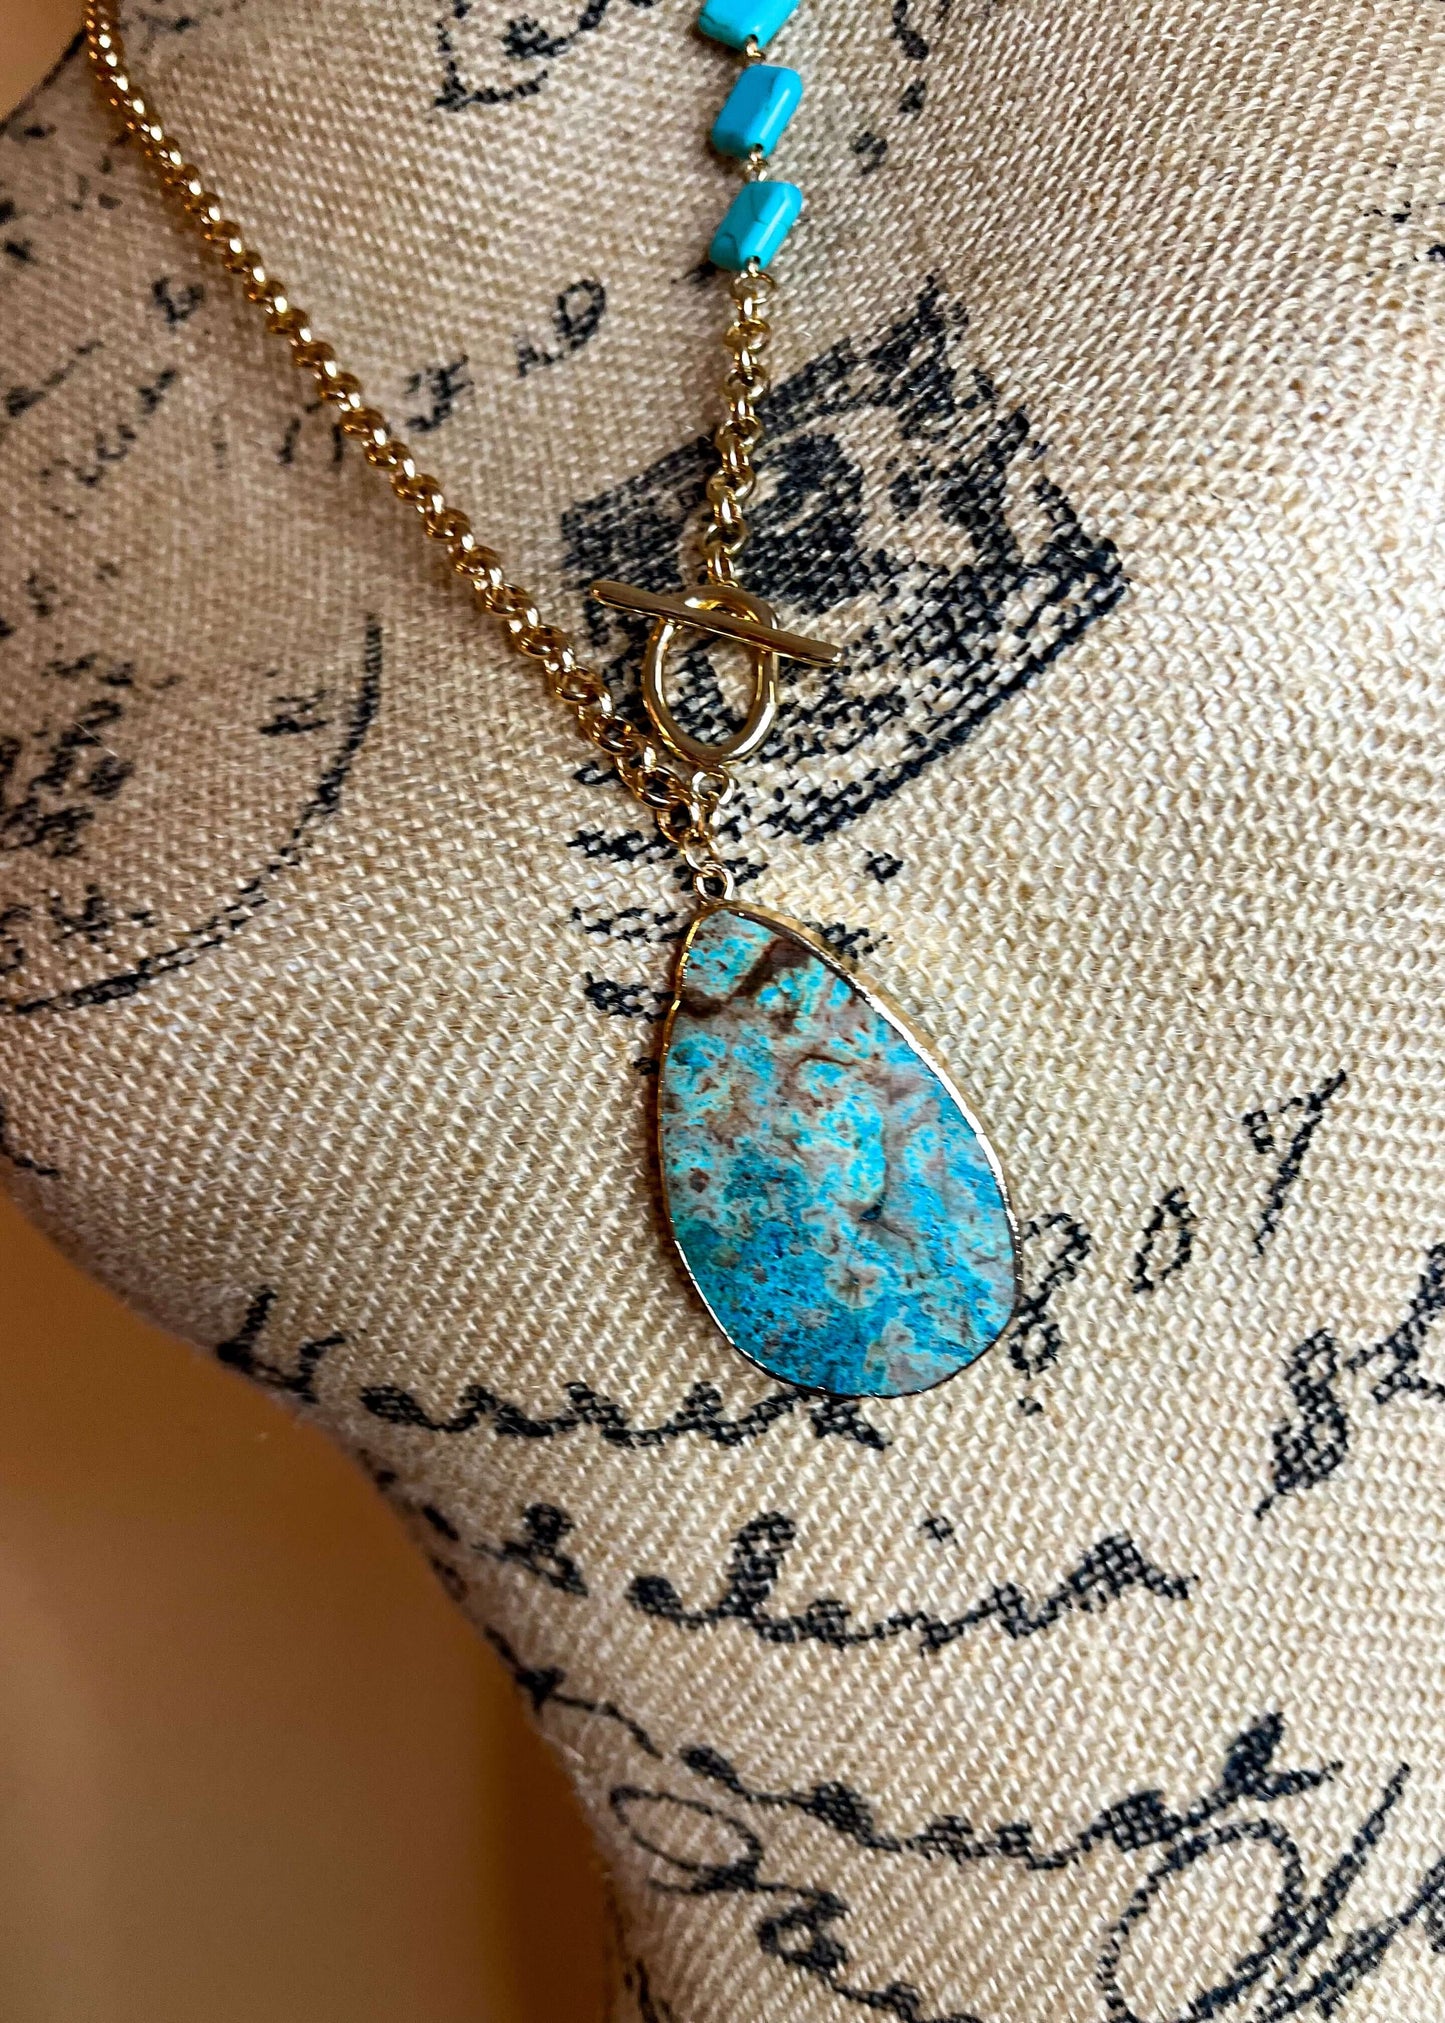 Close-up shot of the turquoise pendant